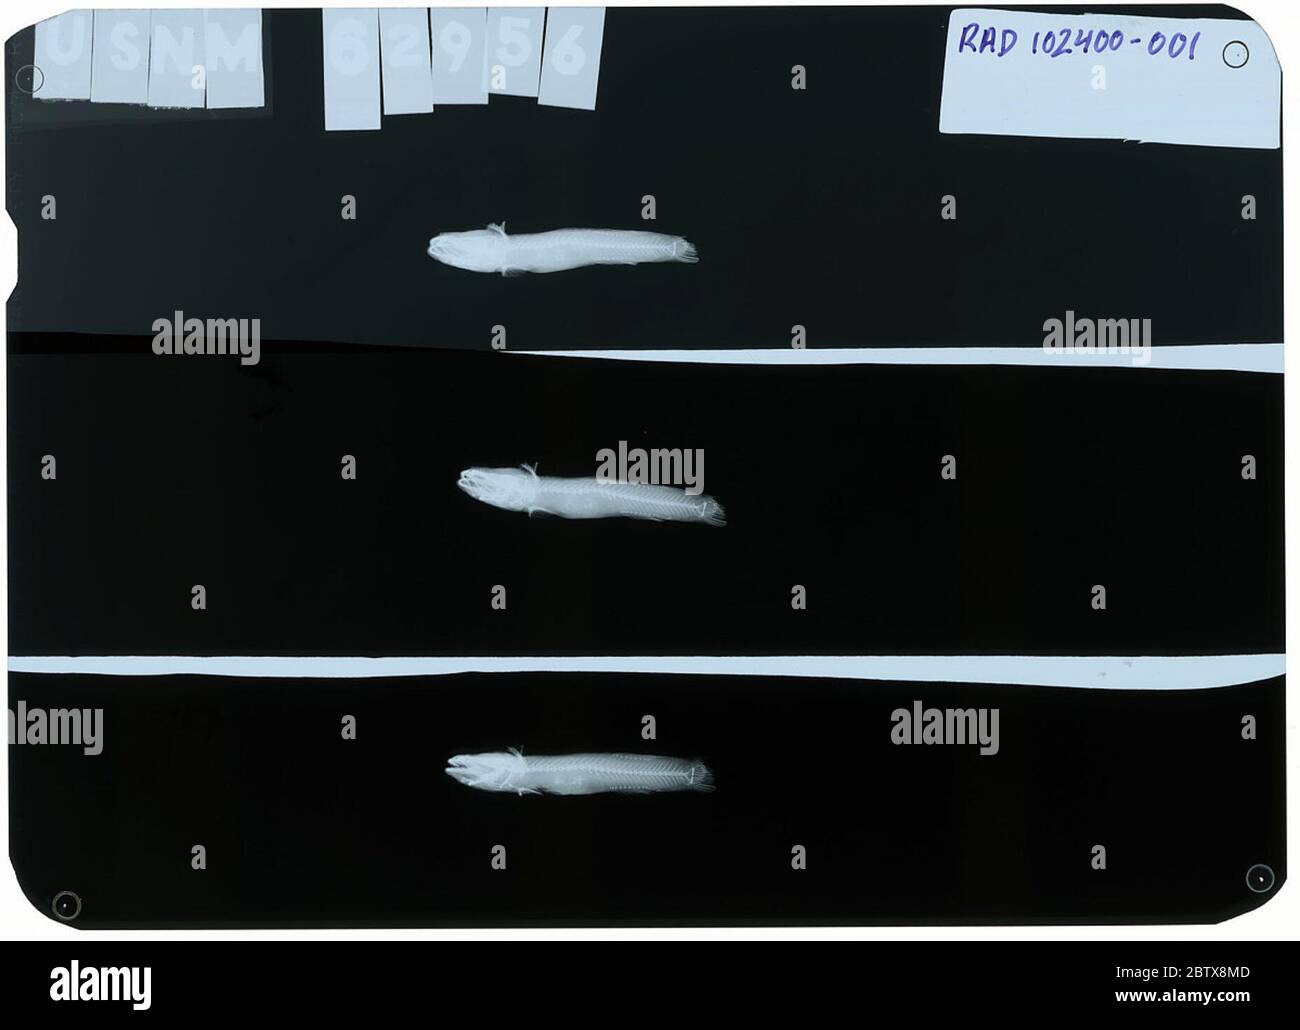 Inu ama. Radiograph is of a type; The Smithsonian NMNH Division of Fishes uses the convention of maintaining the original species name for type specimens designated at the time of description. Stock Photo